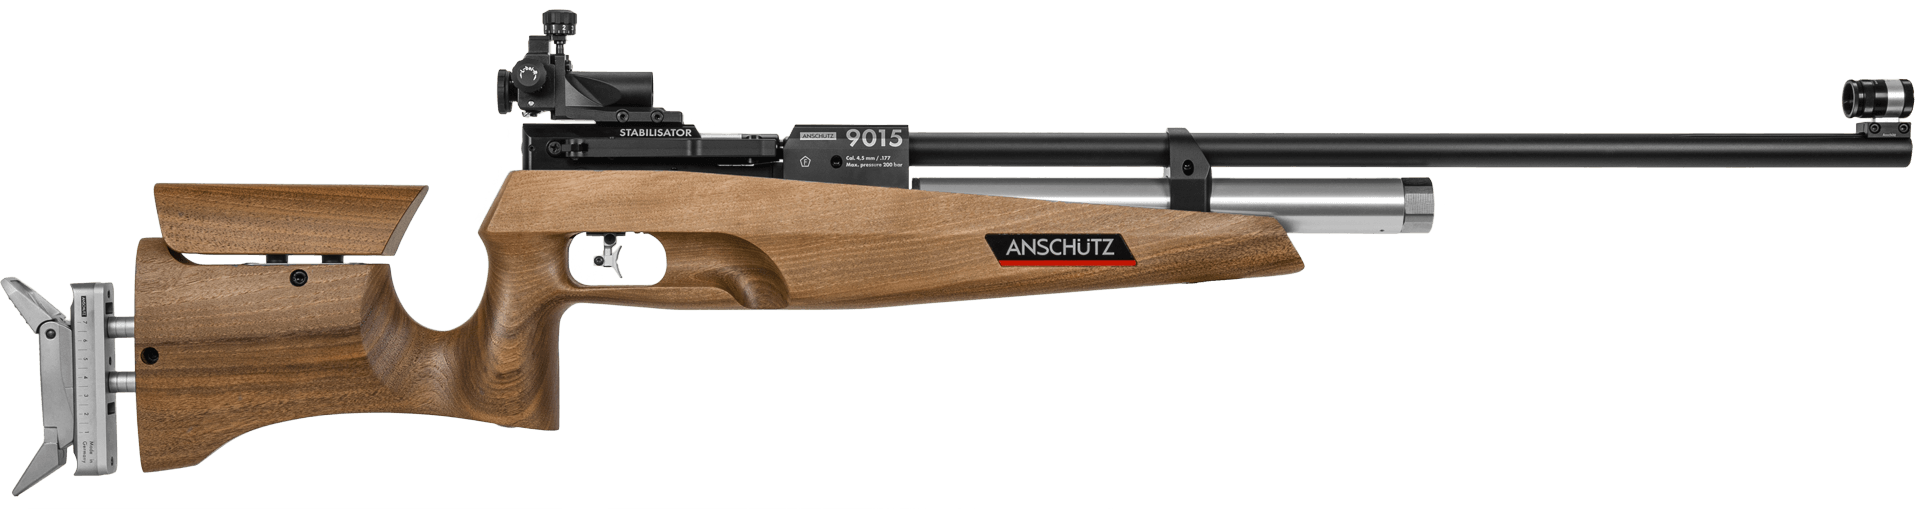 Product finder - ANSCHÜTZ rifles for hunting, biathlon and sports